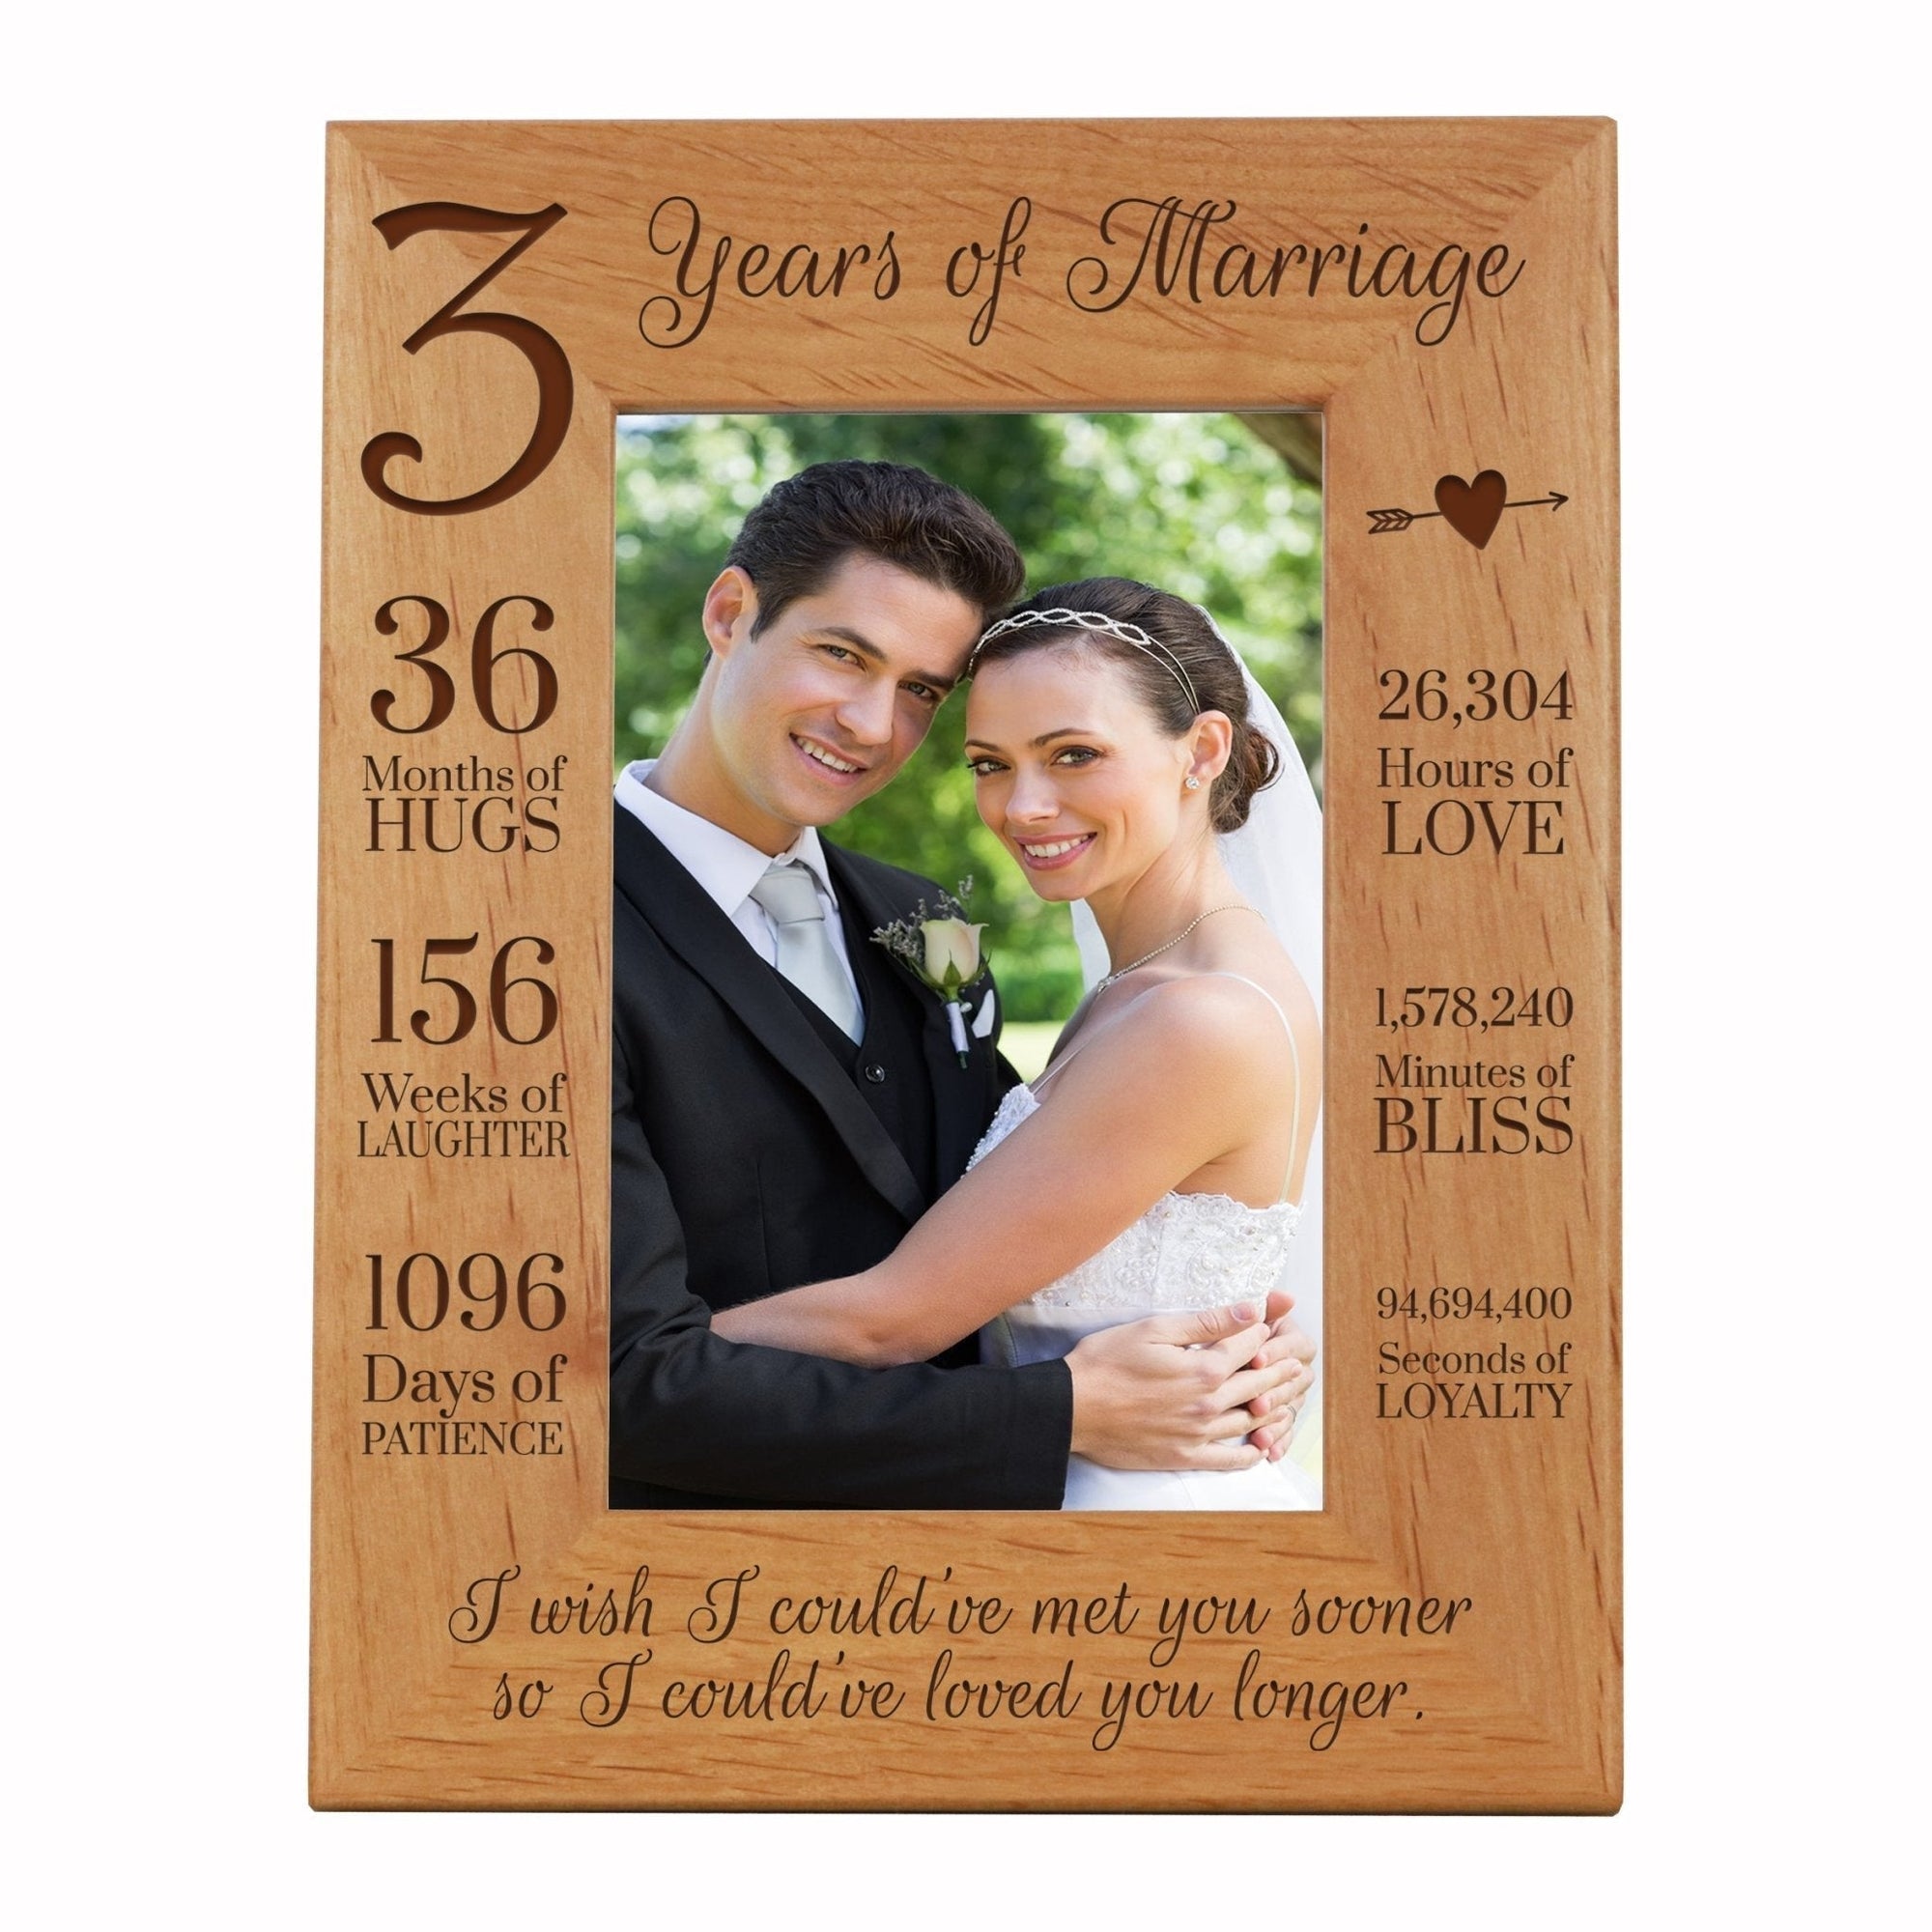 Engraved 3rd Anniversary Picture Frame Gift for Couples - Met You Sooner - LifeSong Milestones